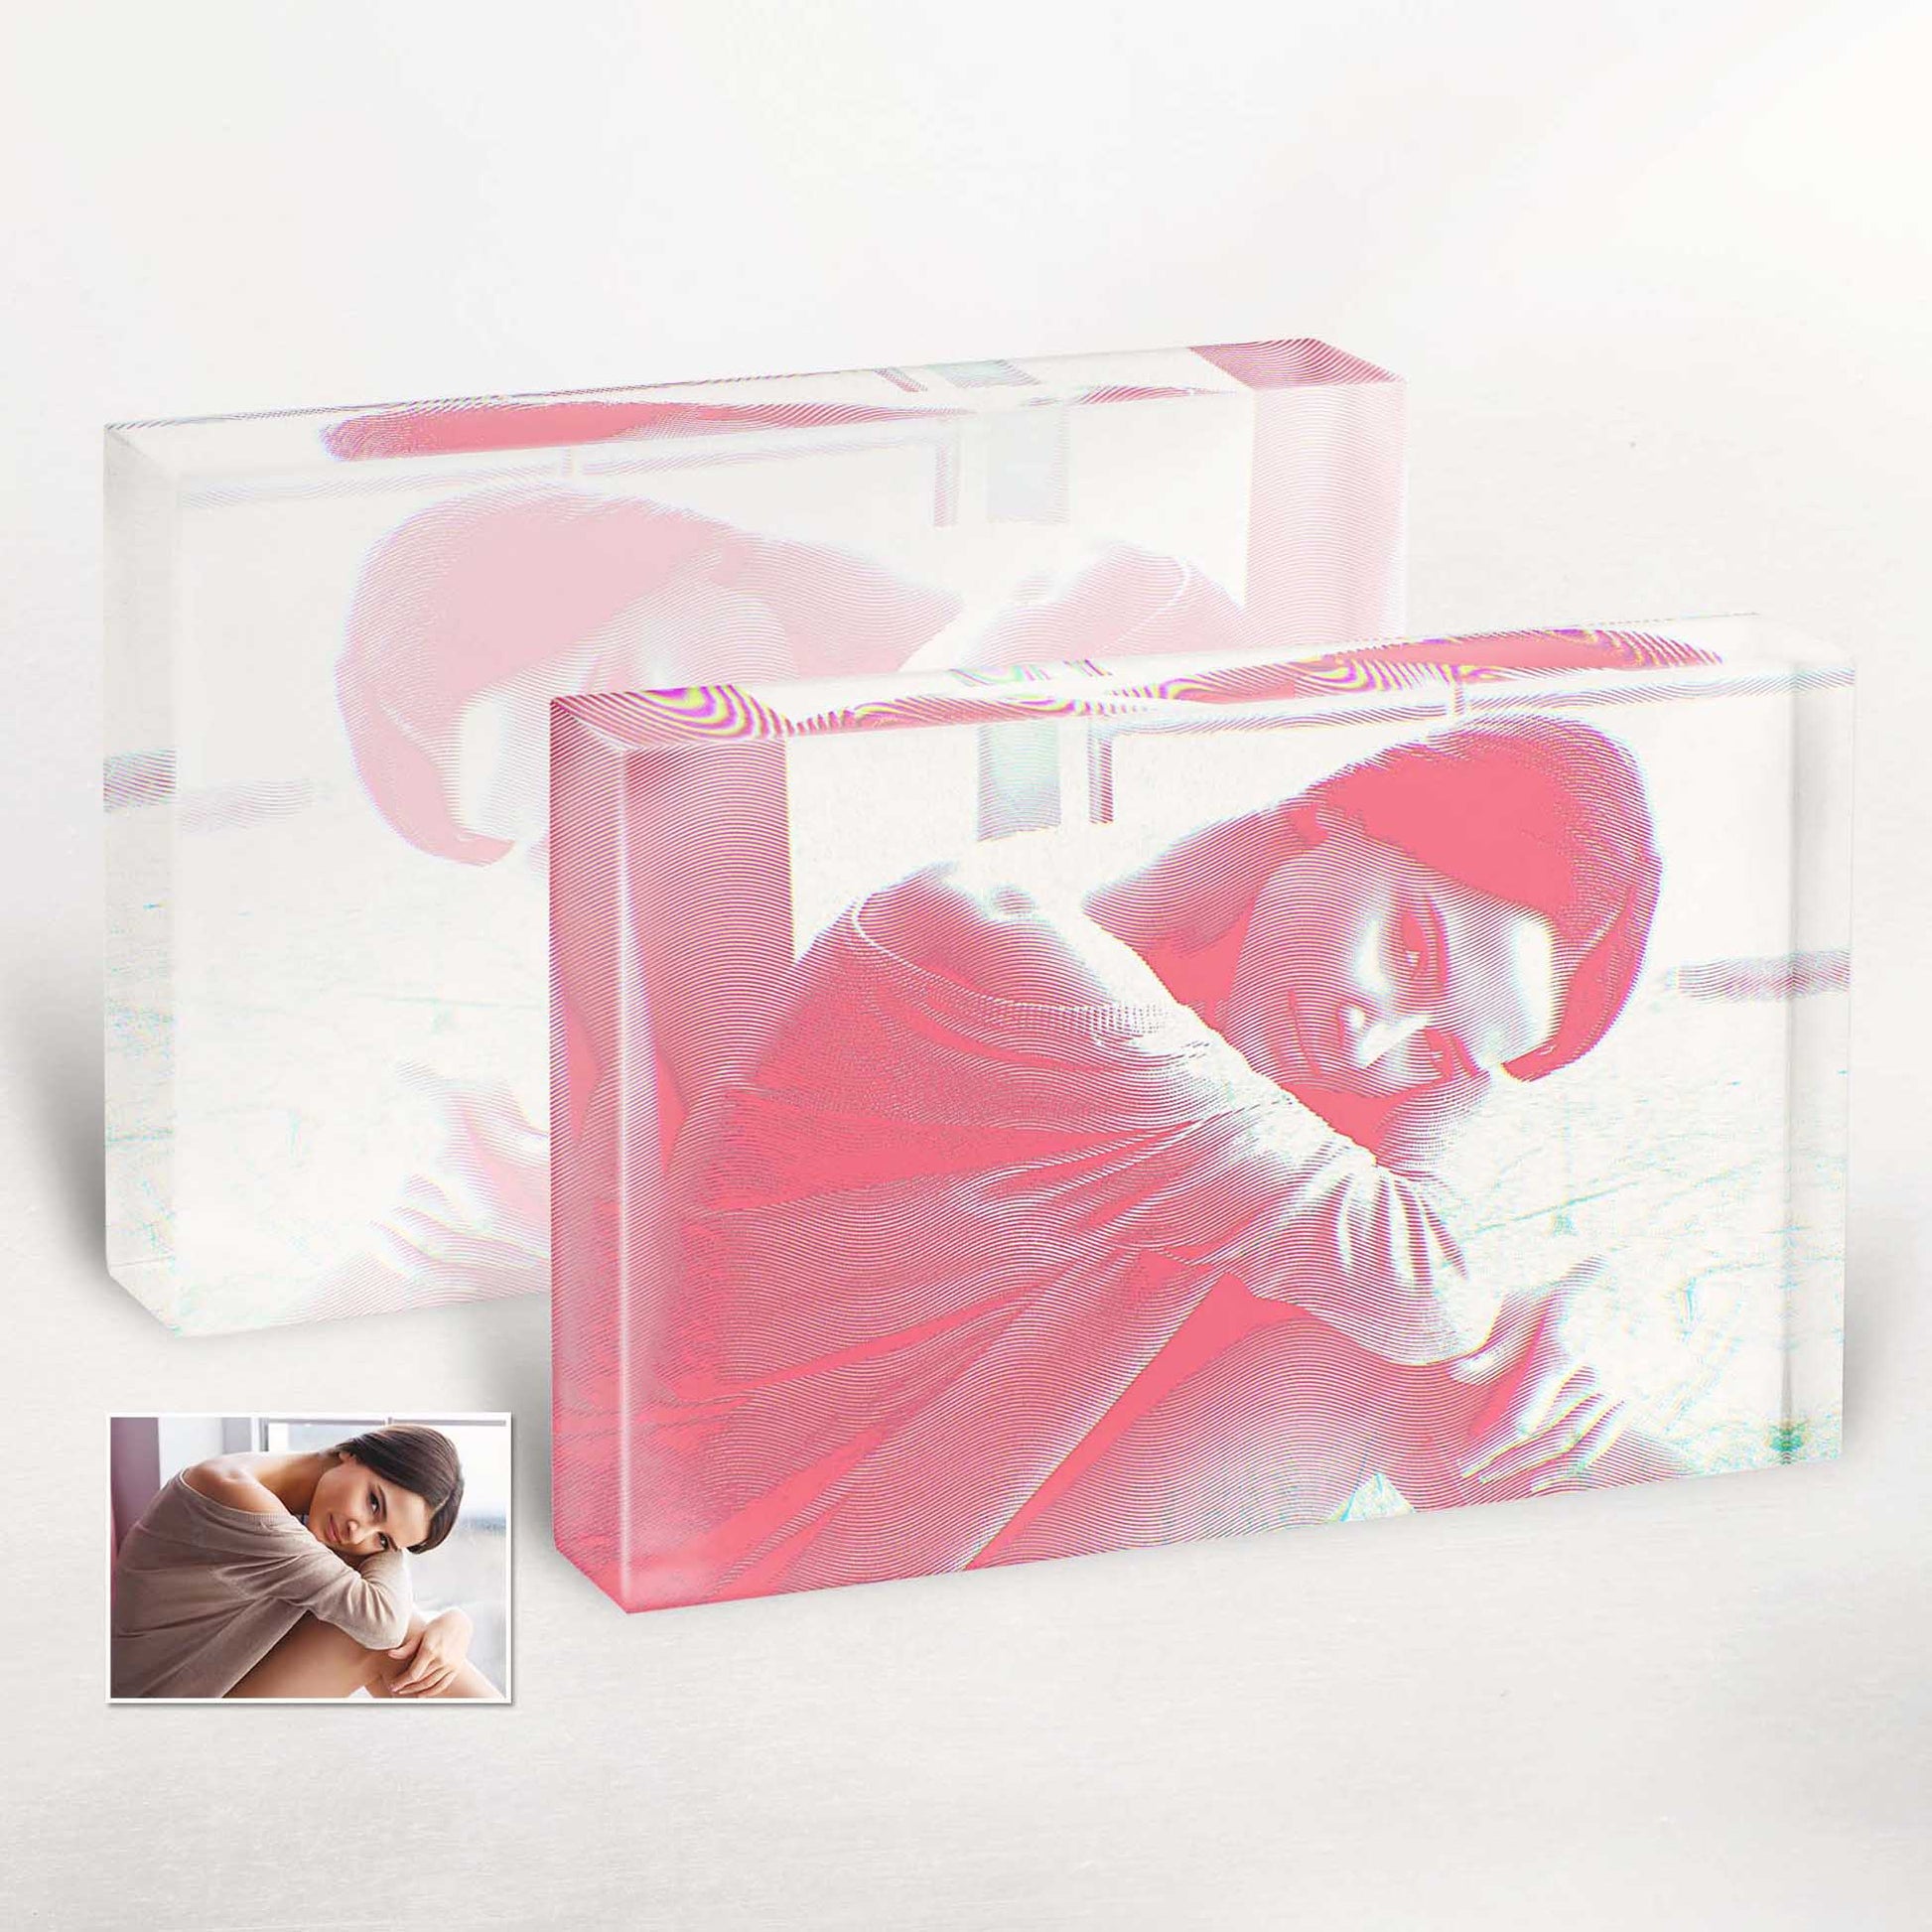 Delight your friends and family with our Personalised Pink Engraving Acrylic Block Photo. Its minimalist style and custom engraving create a trendy and cool gift option. Add a personal touch by choosing a special photo